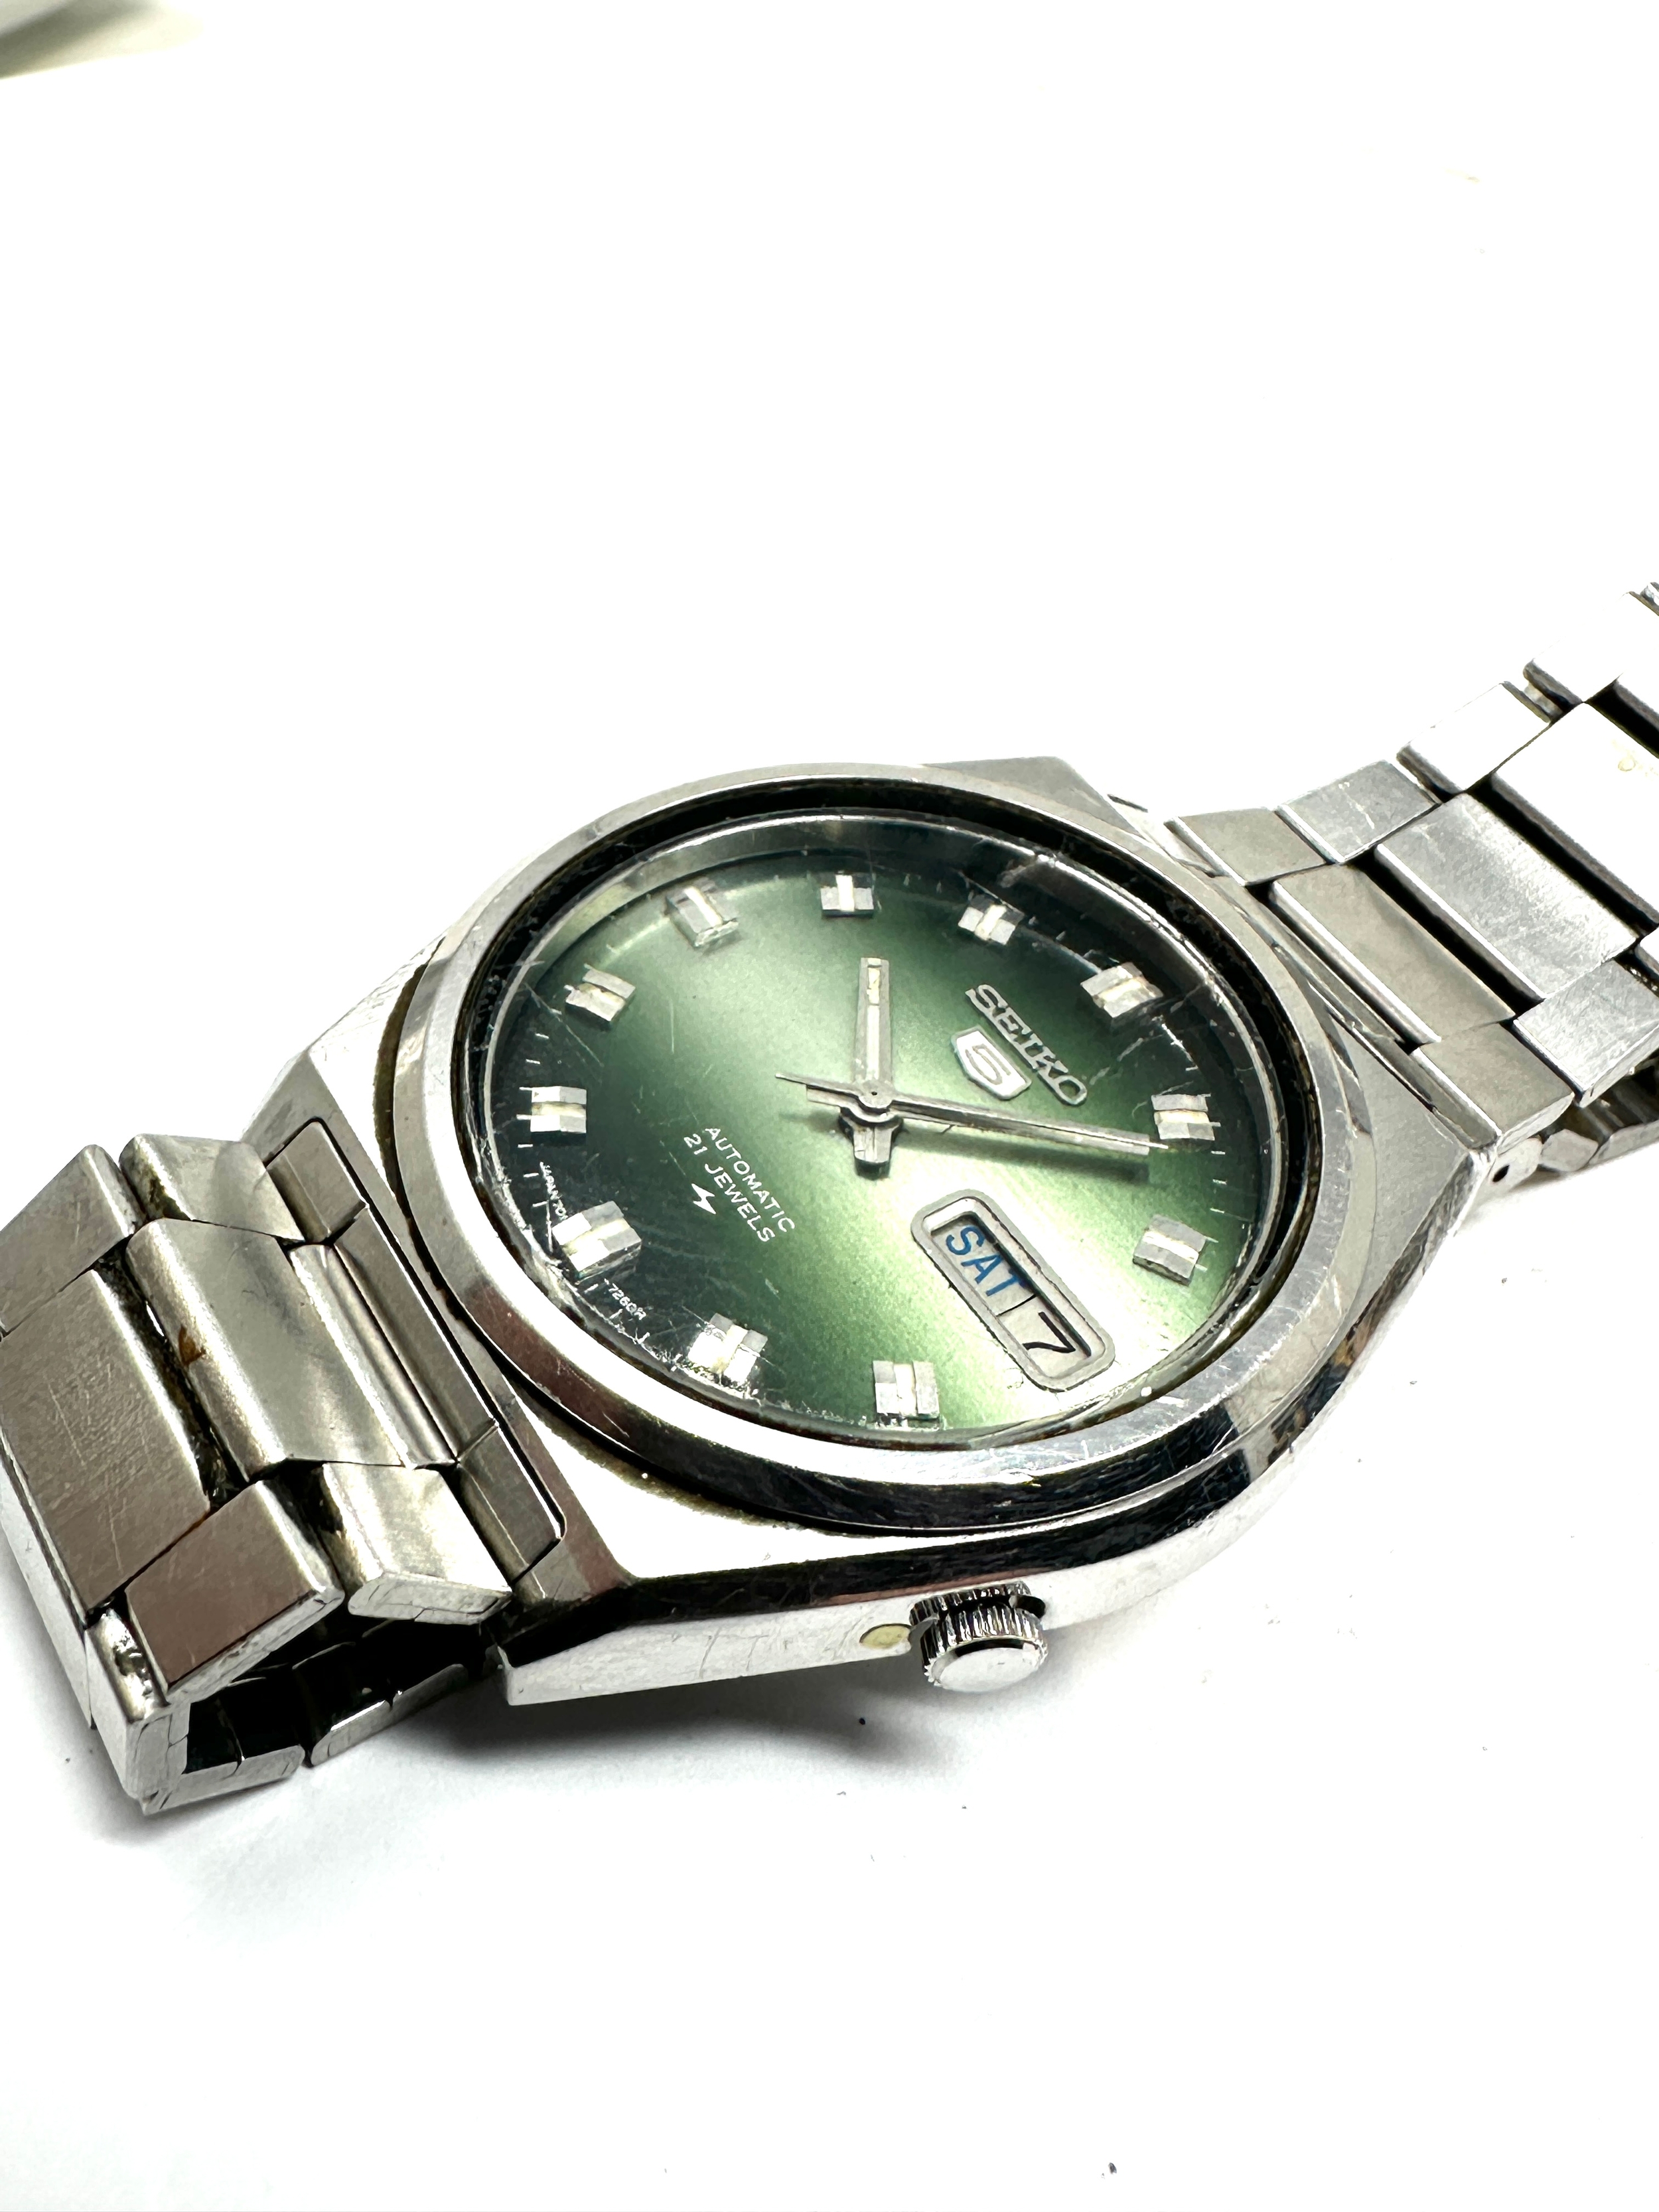 Vintage seiko 5 automatic day date gents wristwatch 7009-876a the watch is ticking - Image 2 of 4